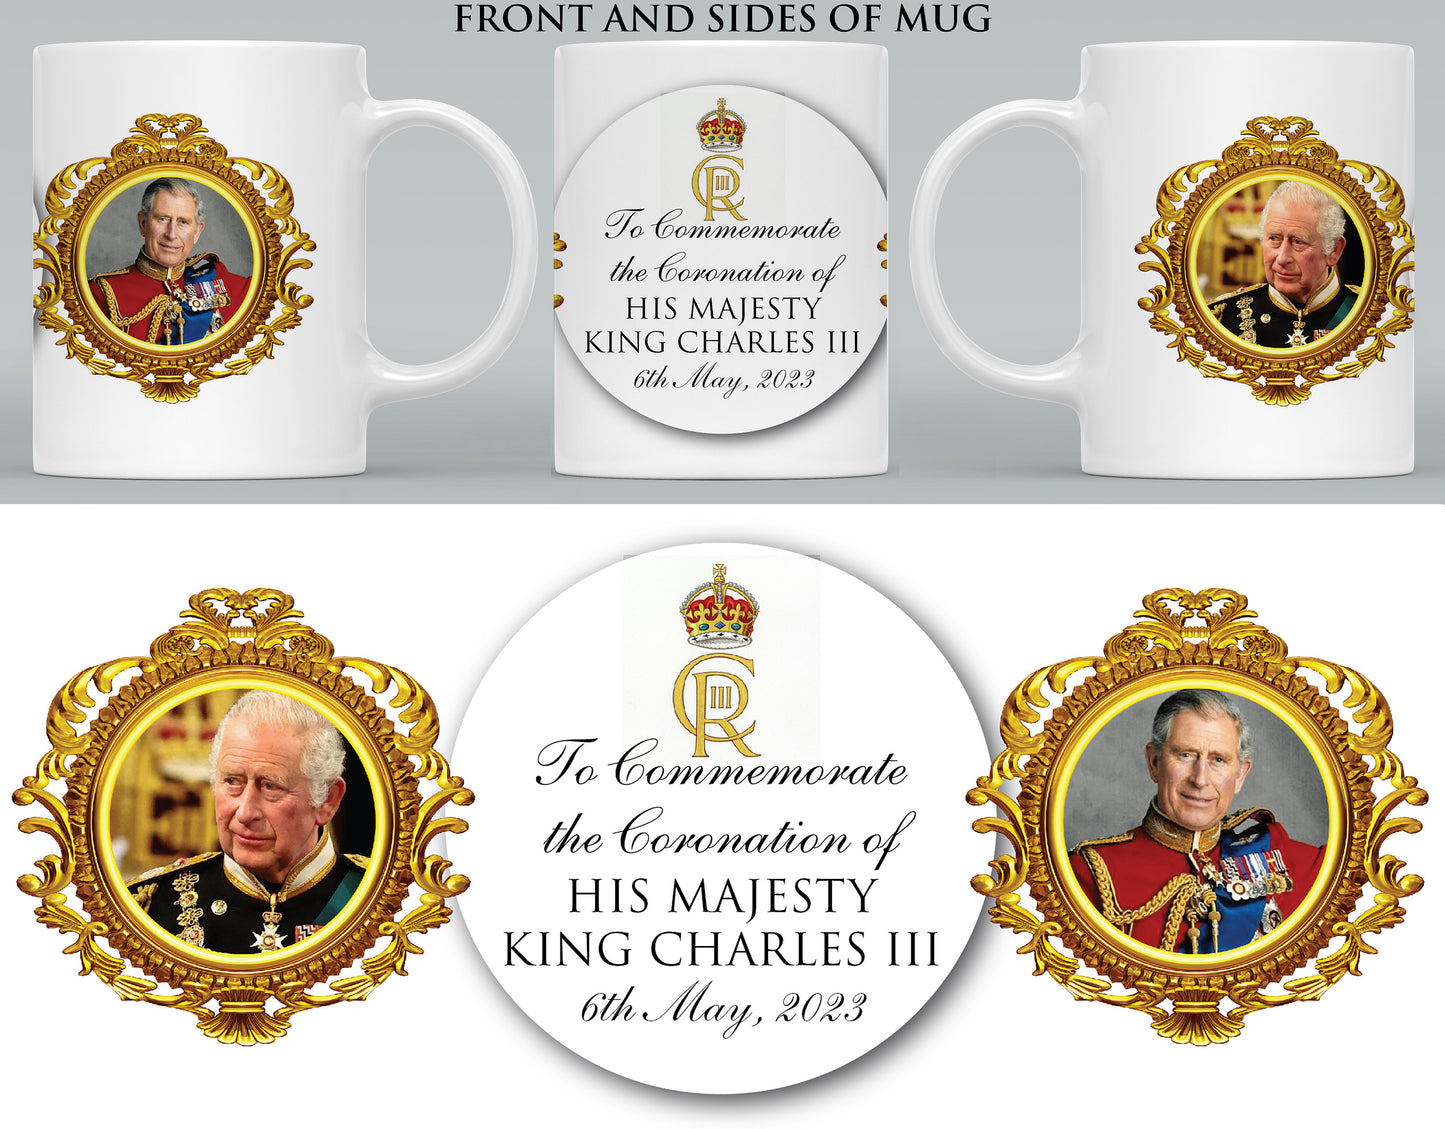 The Coronation of His Majesty King Charles III - Tribute Commemorative Mug A UK Britain Queen Elizabeth | King Charles Coronation Mug